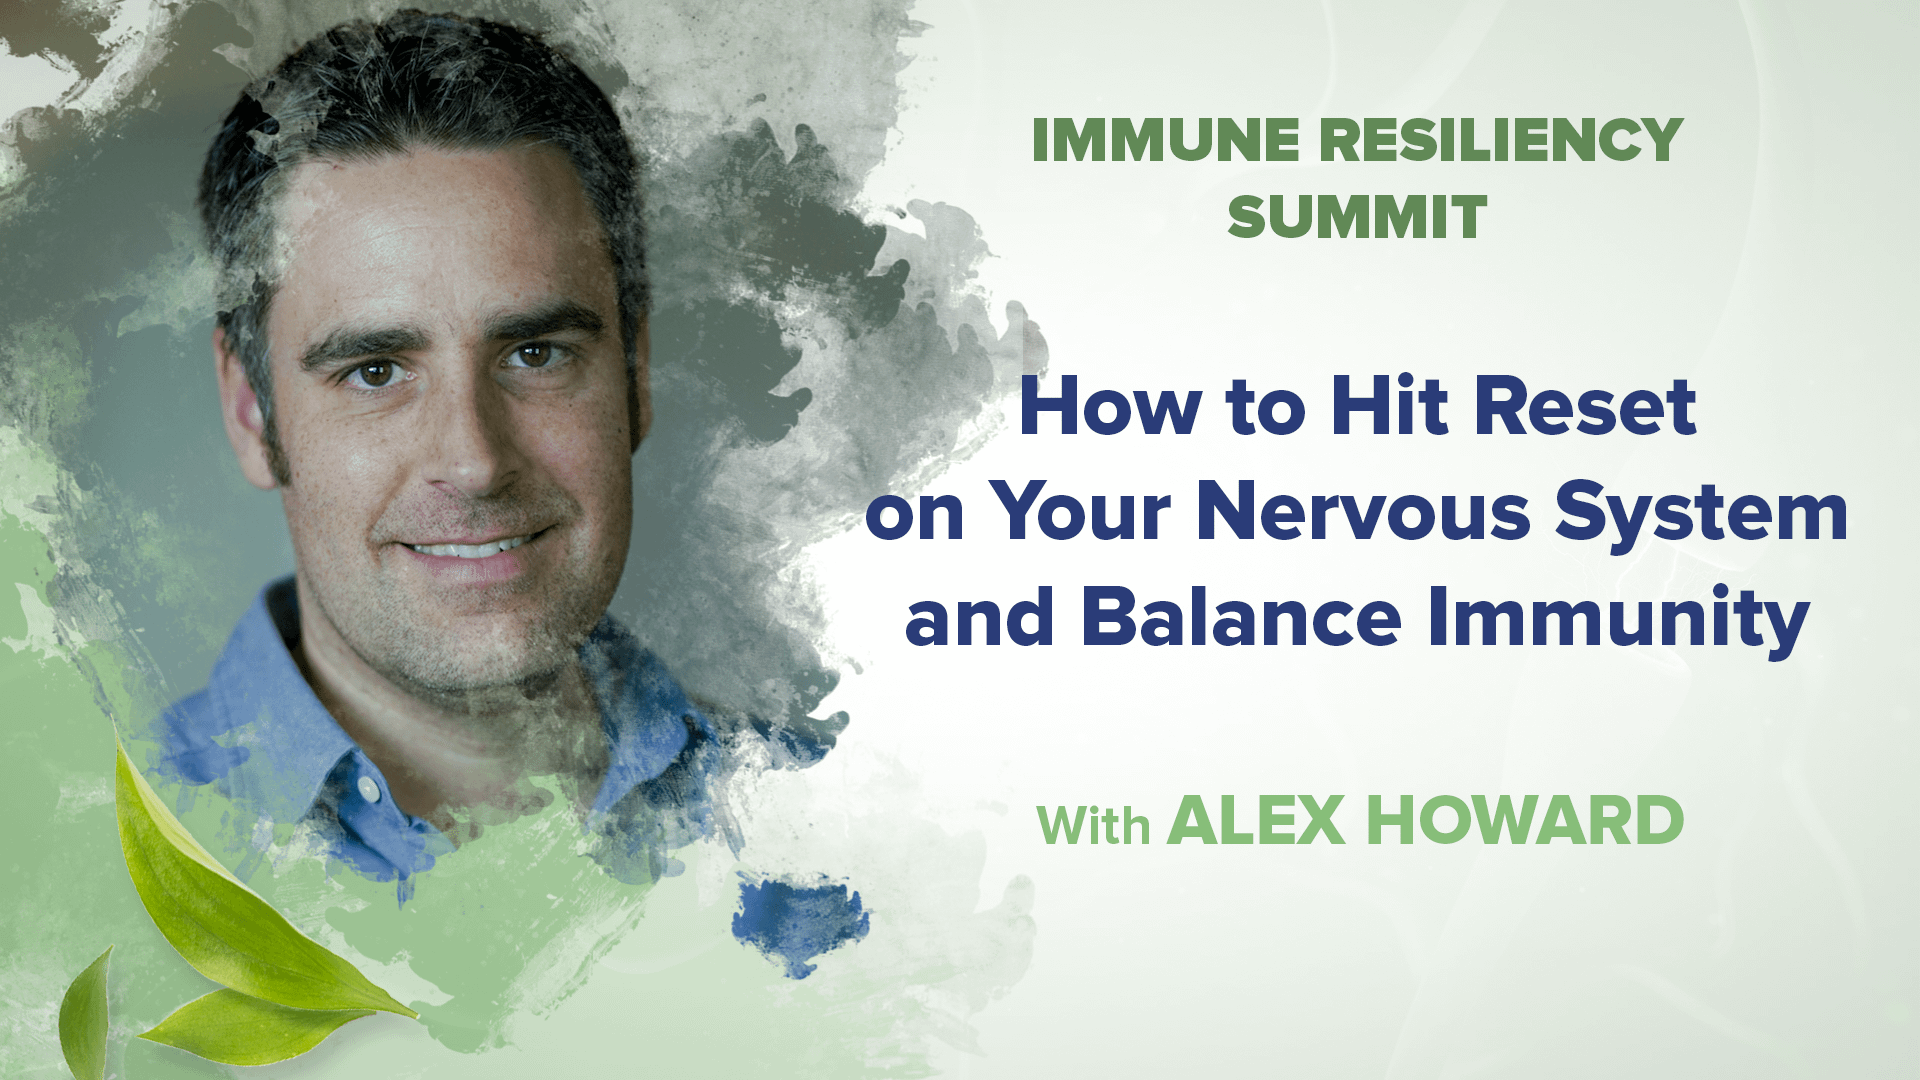 How to Hit Reset on Your Nervous System and Balance Immunity